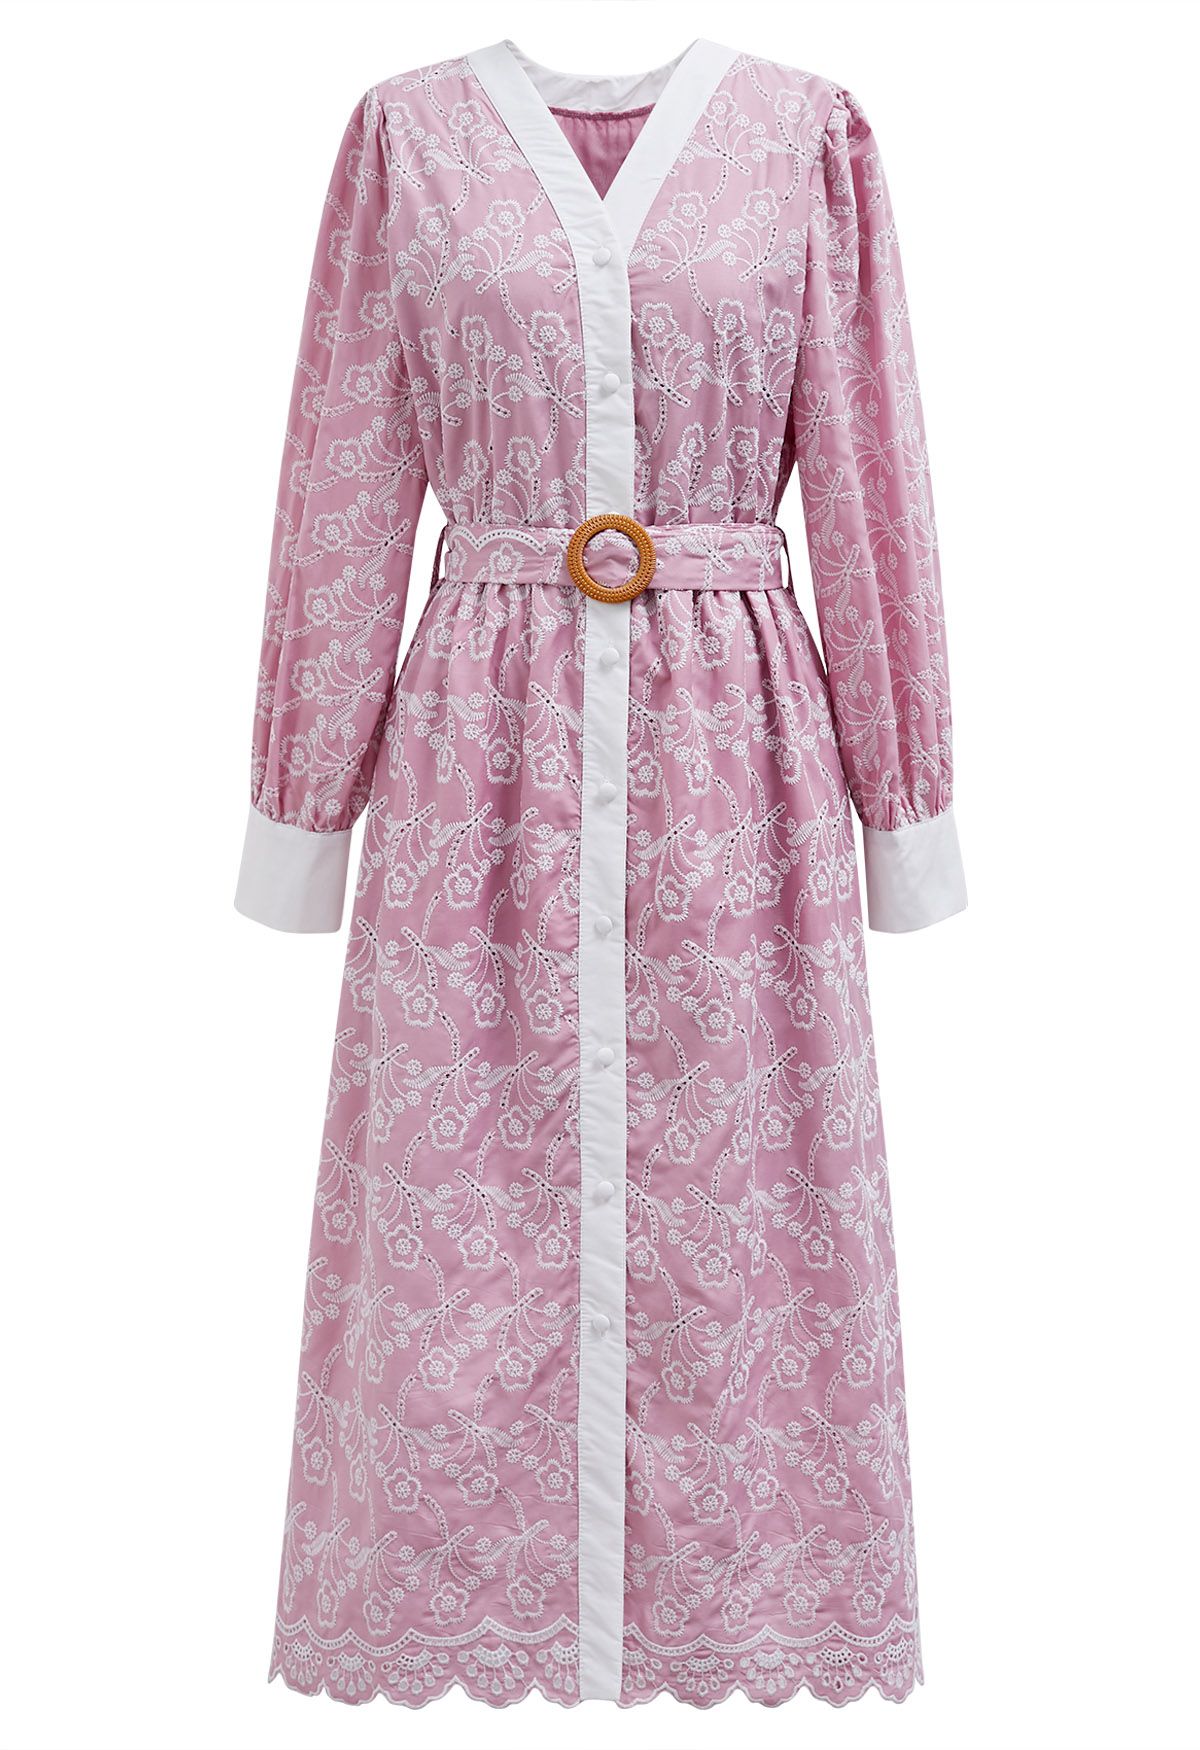 Dancing Floret Embroidered Button Down Dress in Pink